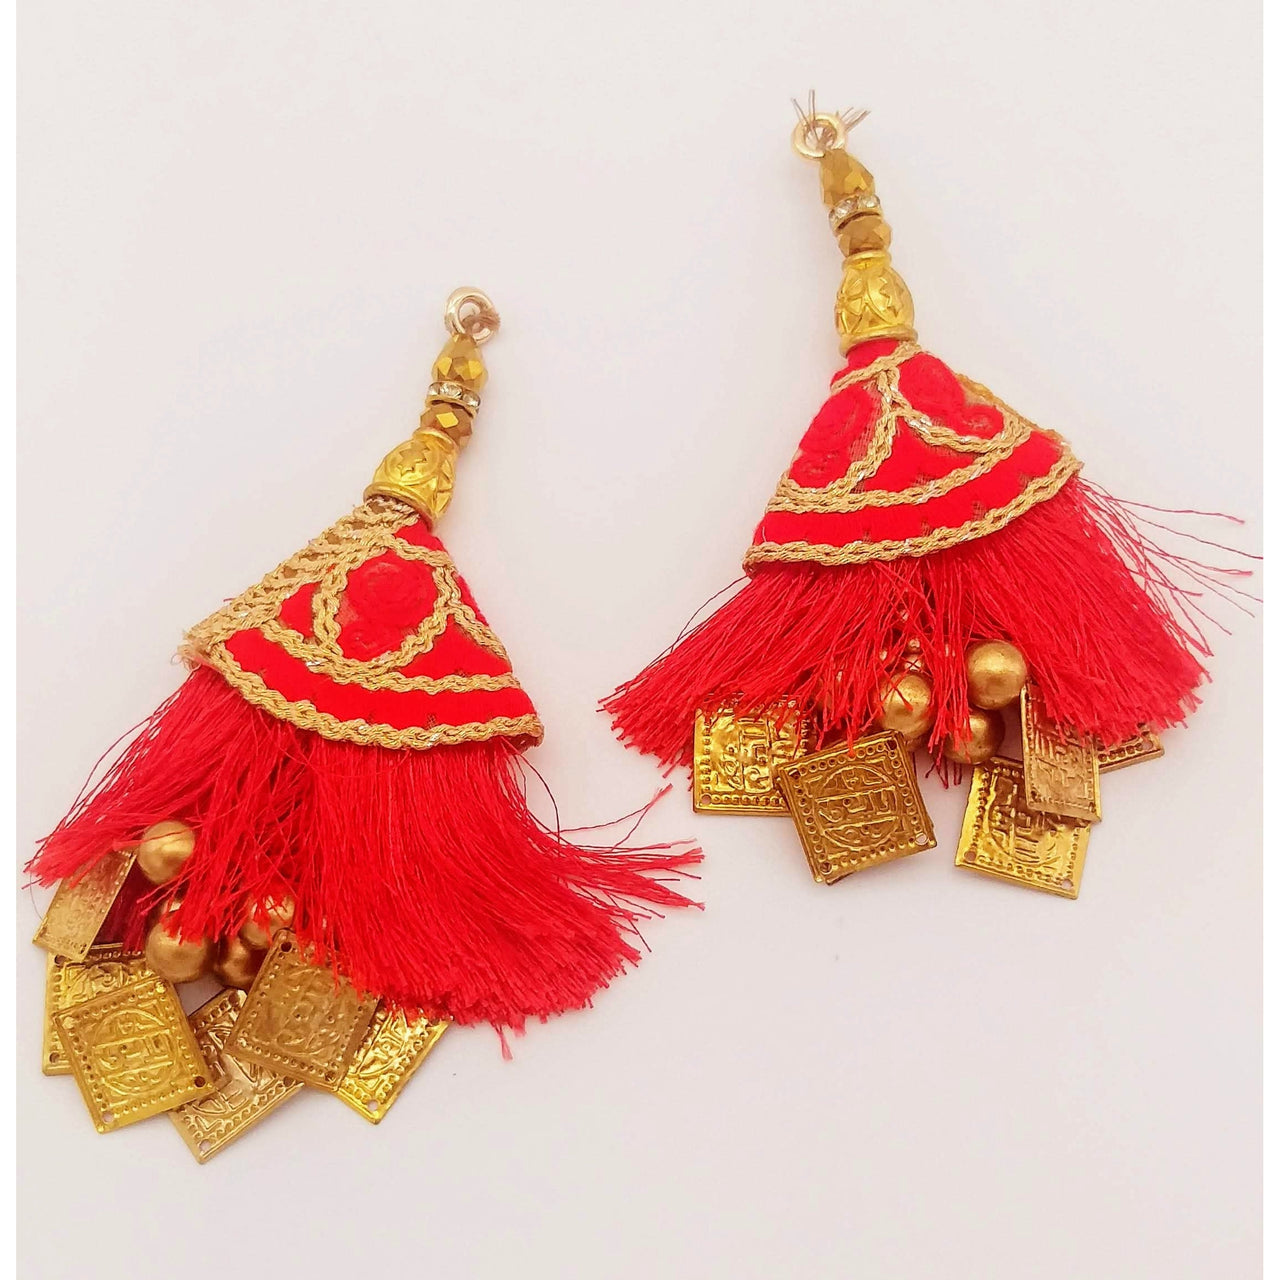 Red Tassels With Gold Beads, Beaded Tassels With Red and Gold Embroidery, Traditional Indian Latkan